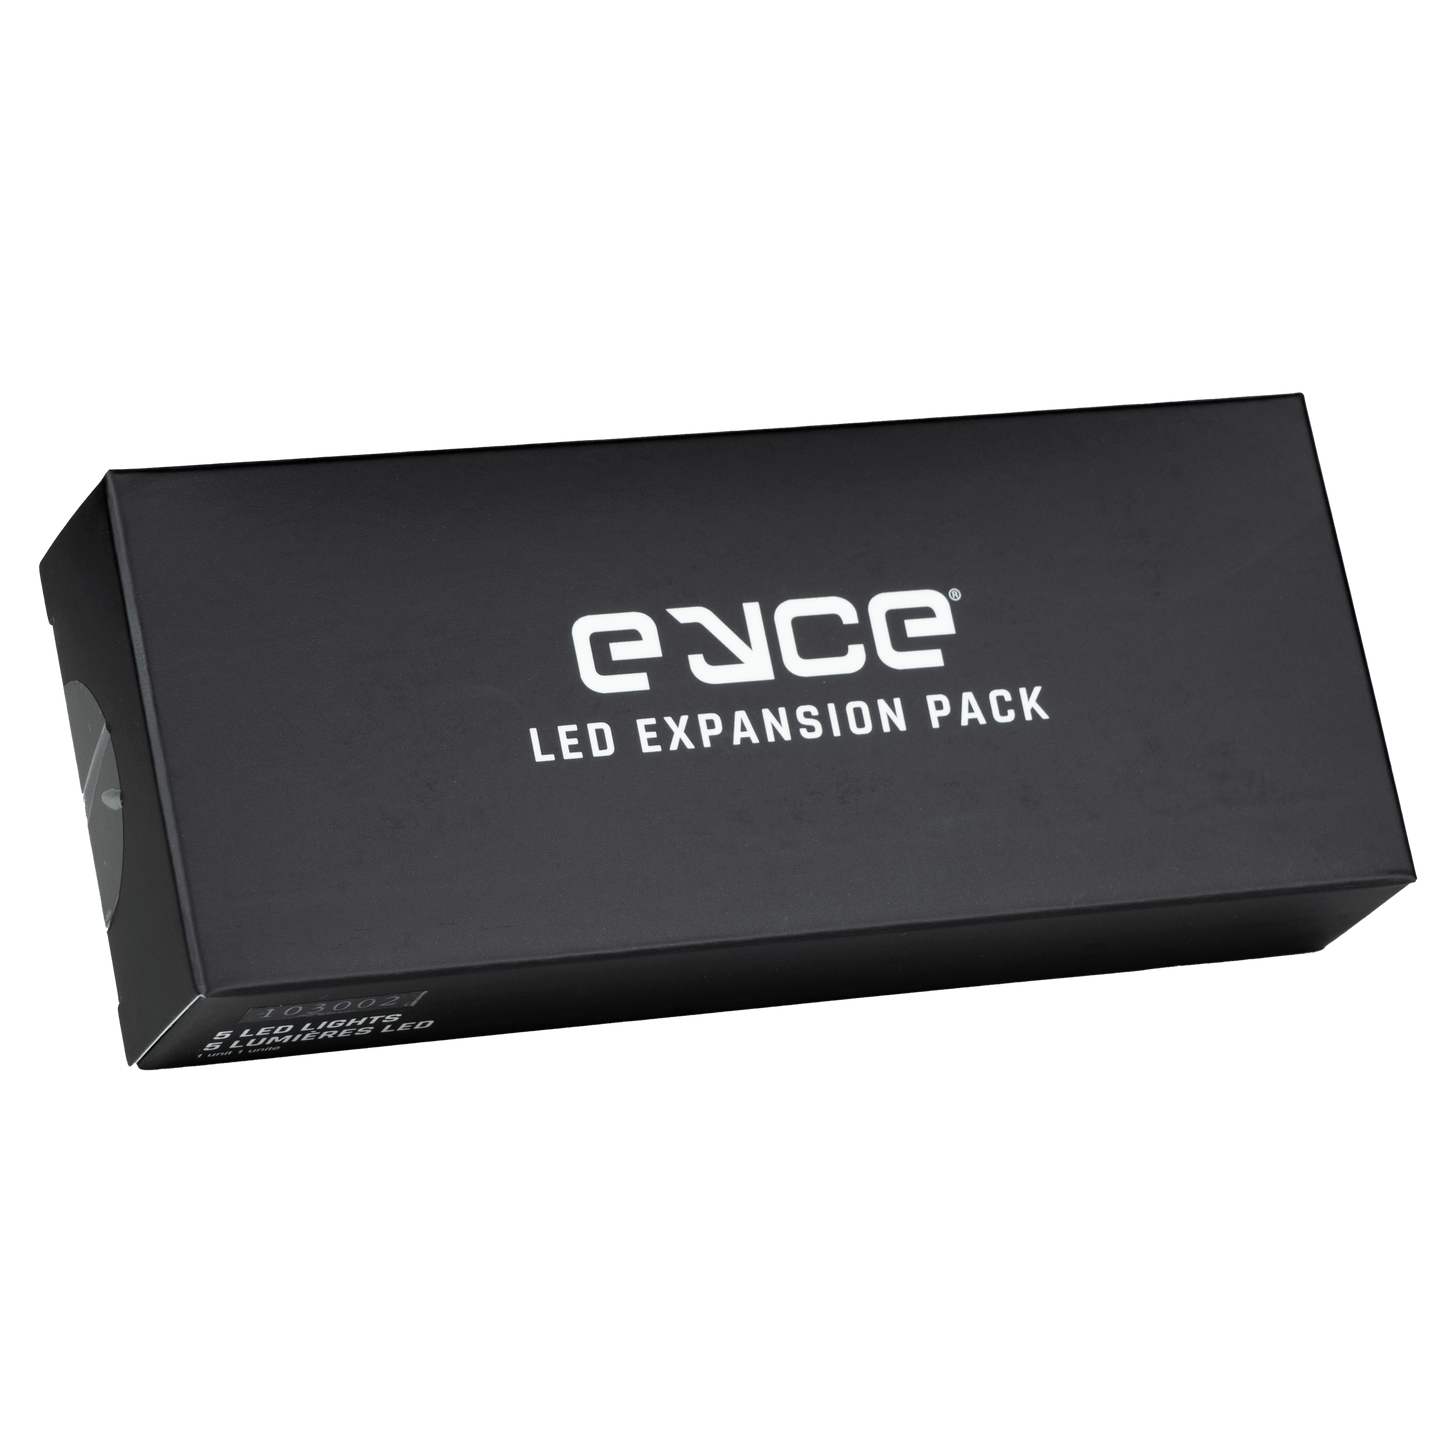 Eyce Spark LED Expansion Pack Best Sales Price - Accessories